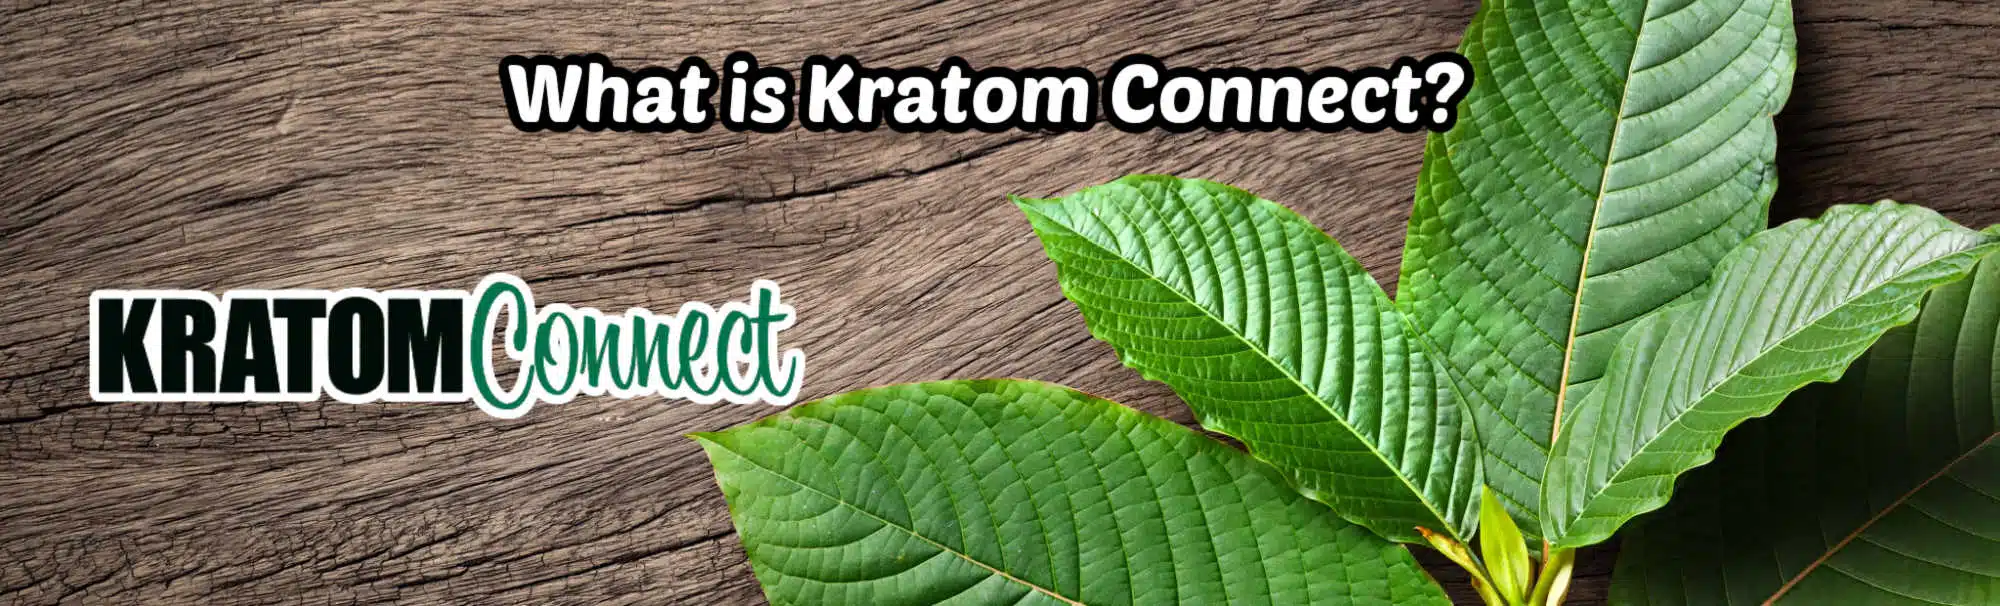 image of what is kratom connect